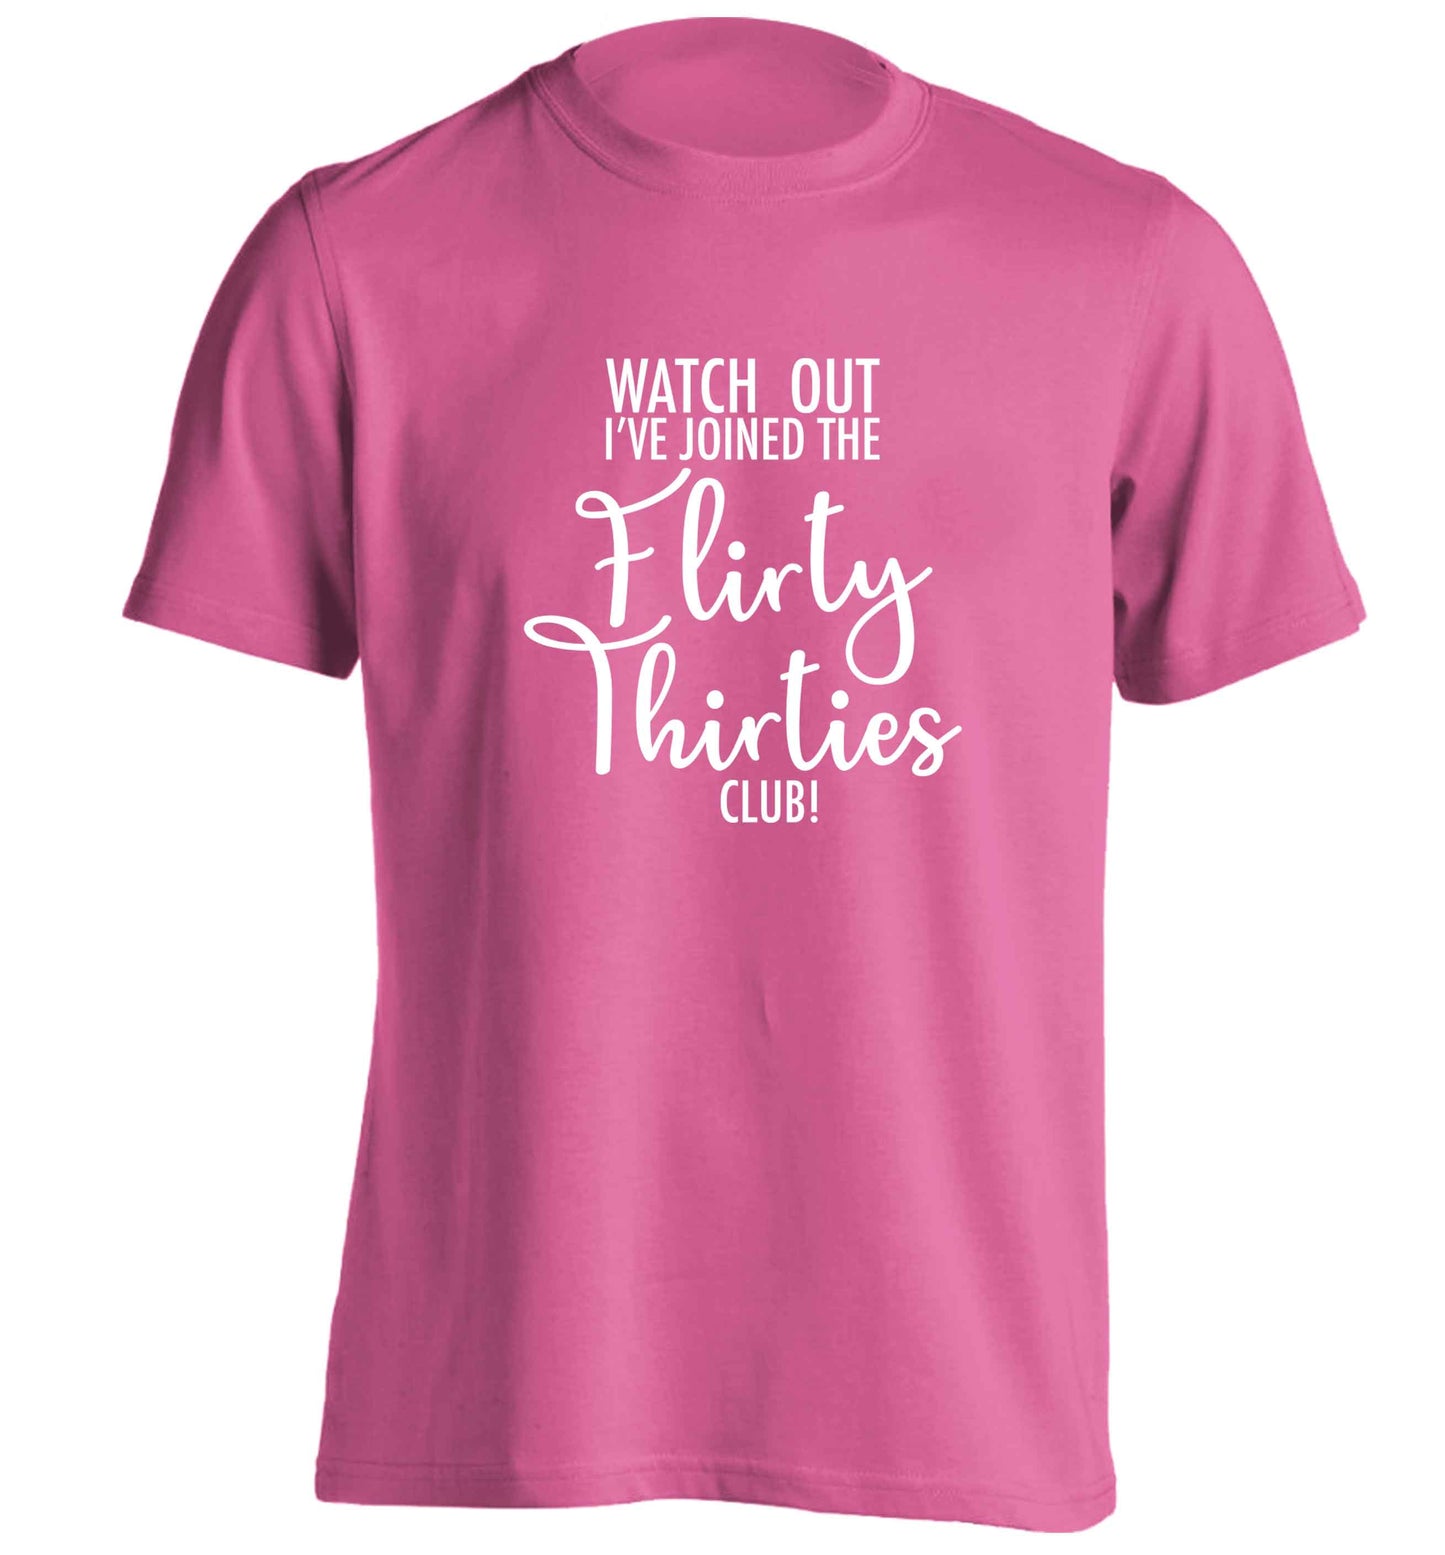 Watch out I've joined the flirty thirties club adults unisex pink Tshirt 2XL